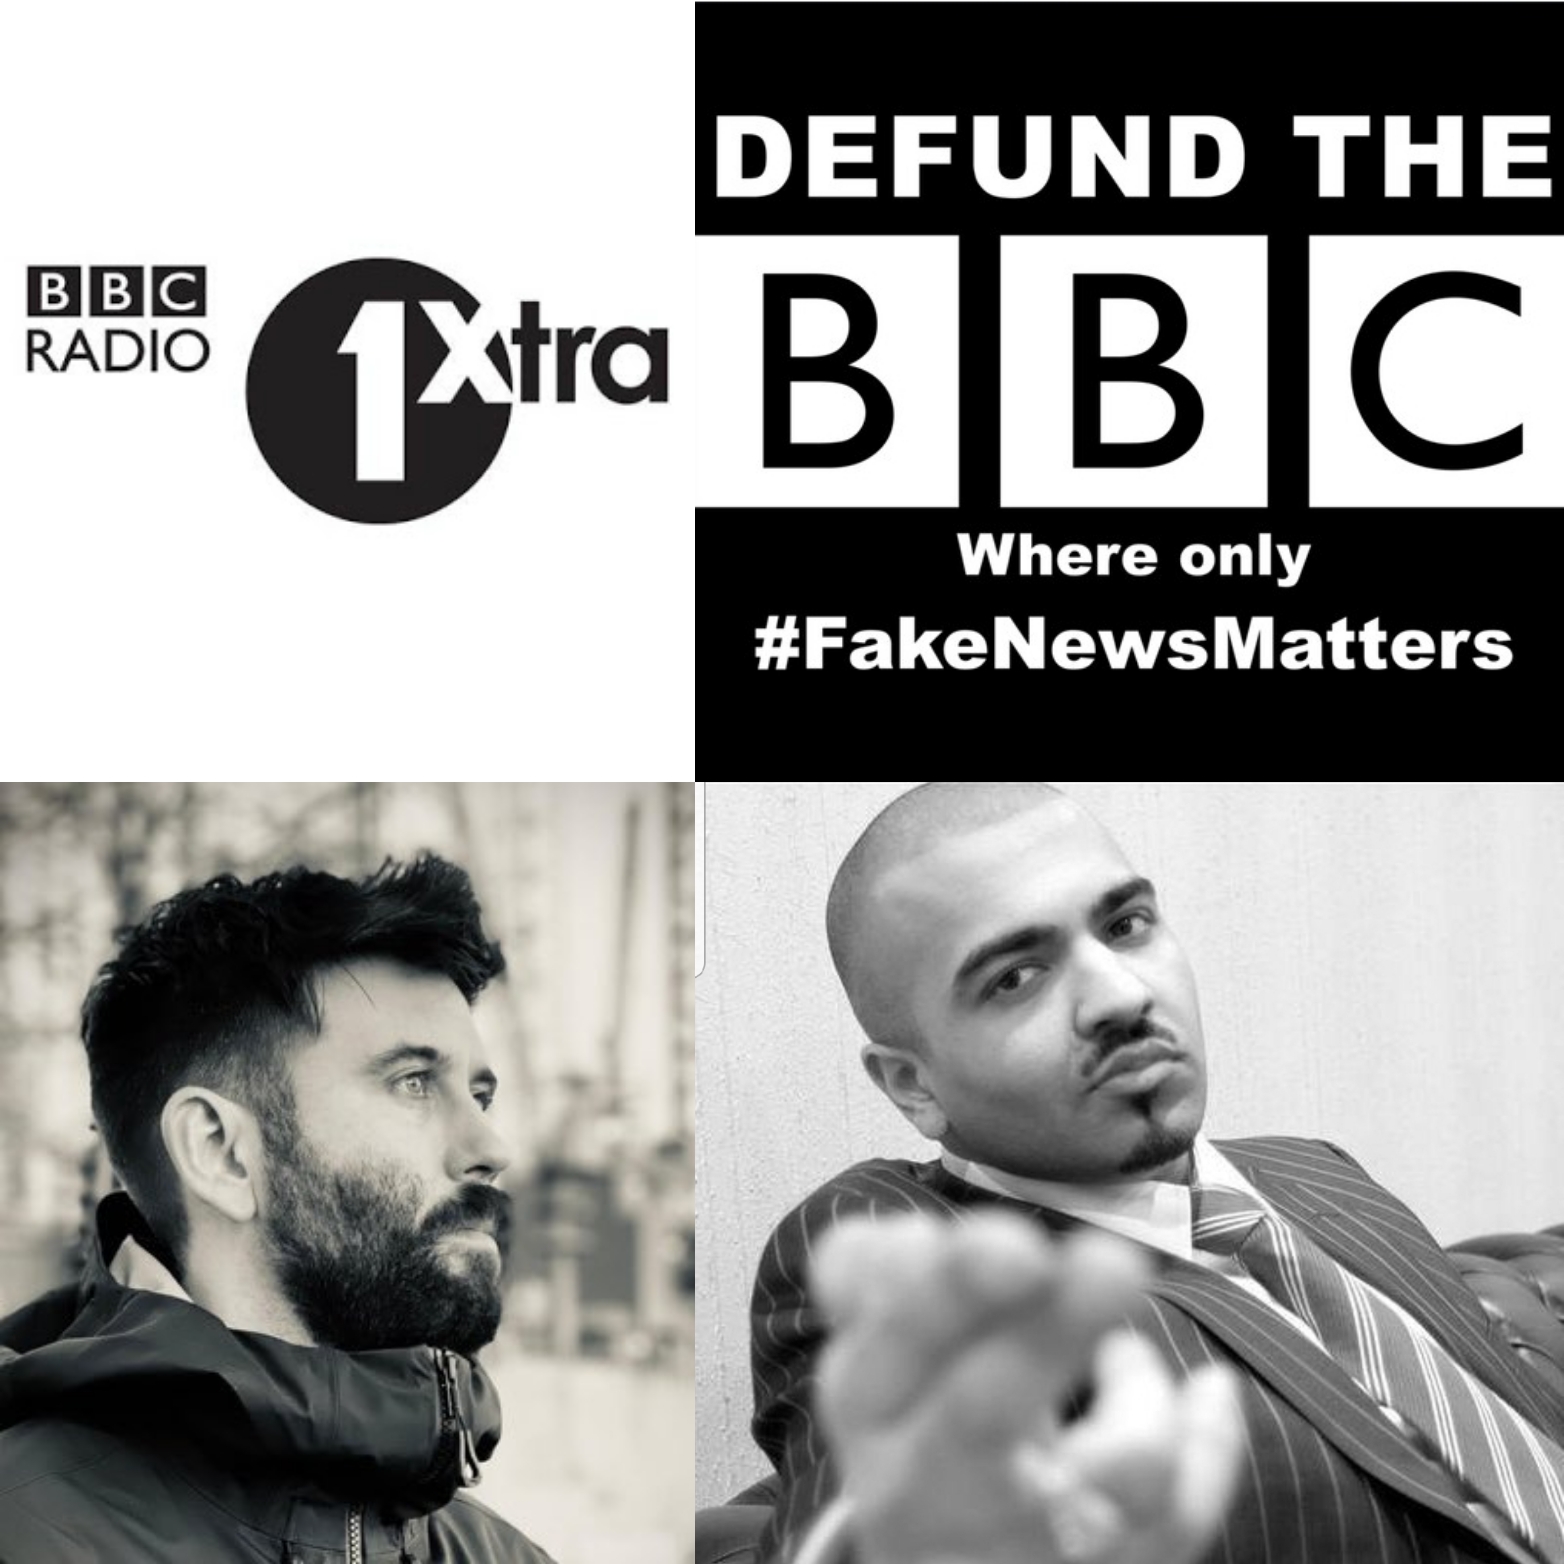 Rancid Reporter Rat Myles Bonnar Went On BBC 1Xtra (Black Music) Podcast To Justify Accusations That He Racially Targeted Innocent BAME Male Dating Coach Adnan Ahmed (Addy Agame Proven Innocent In High Court)